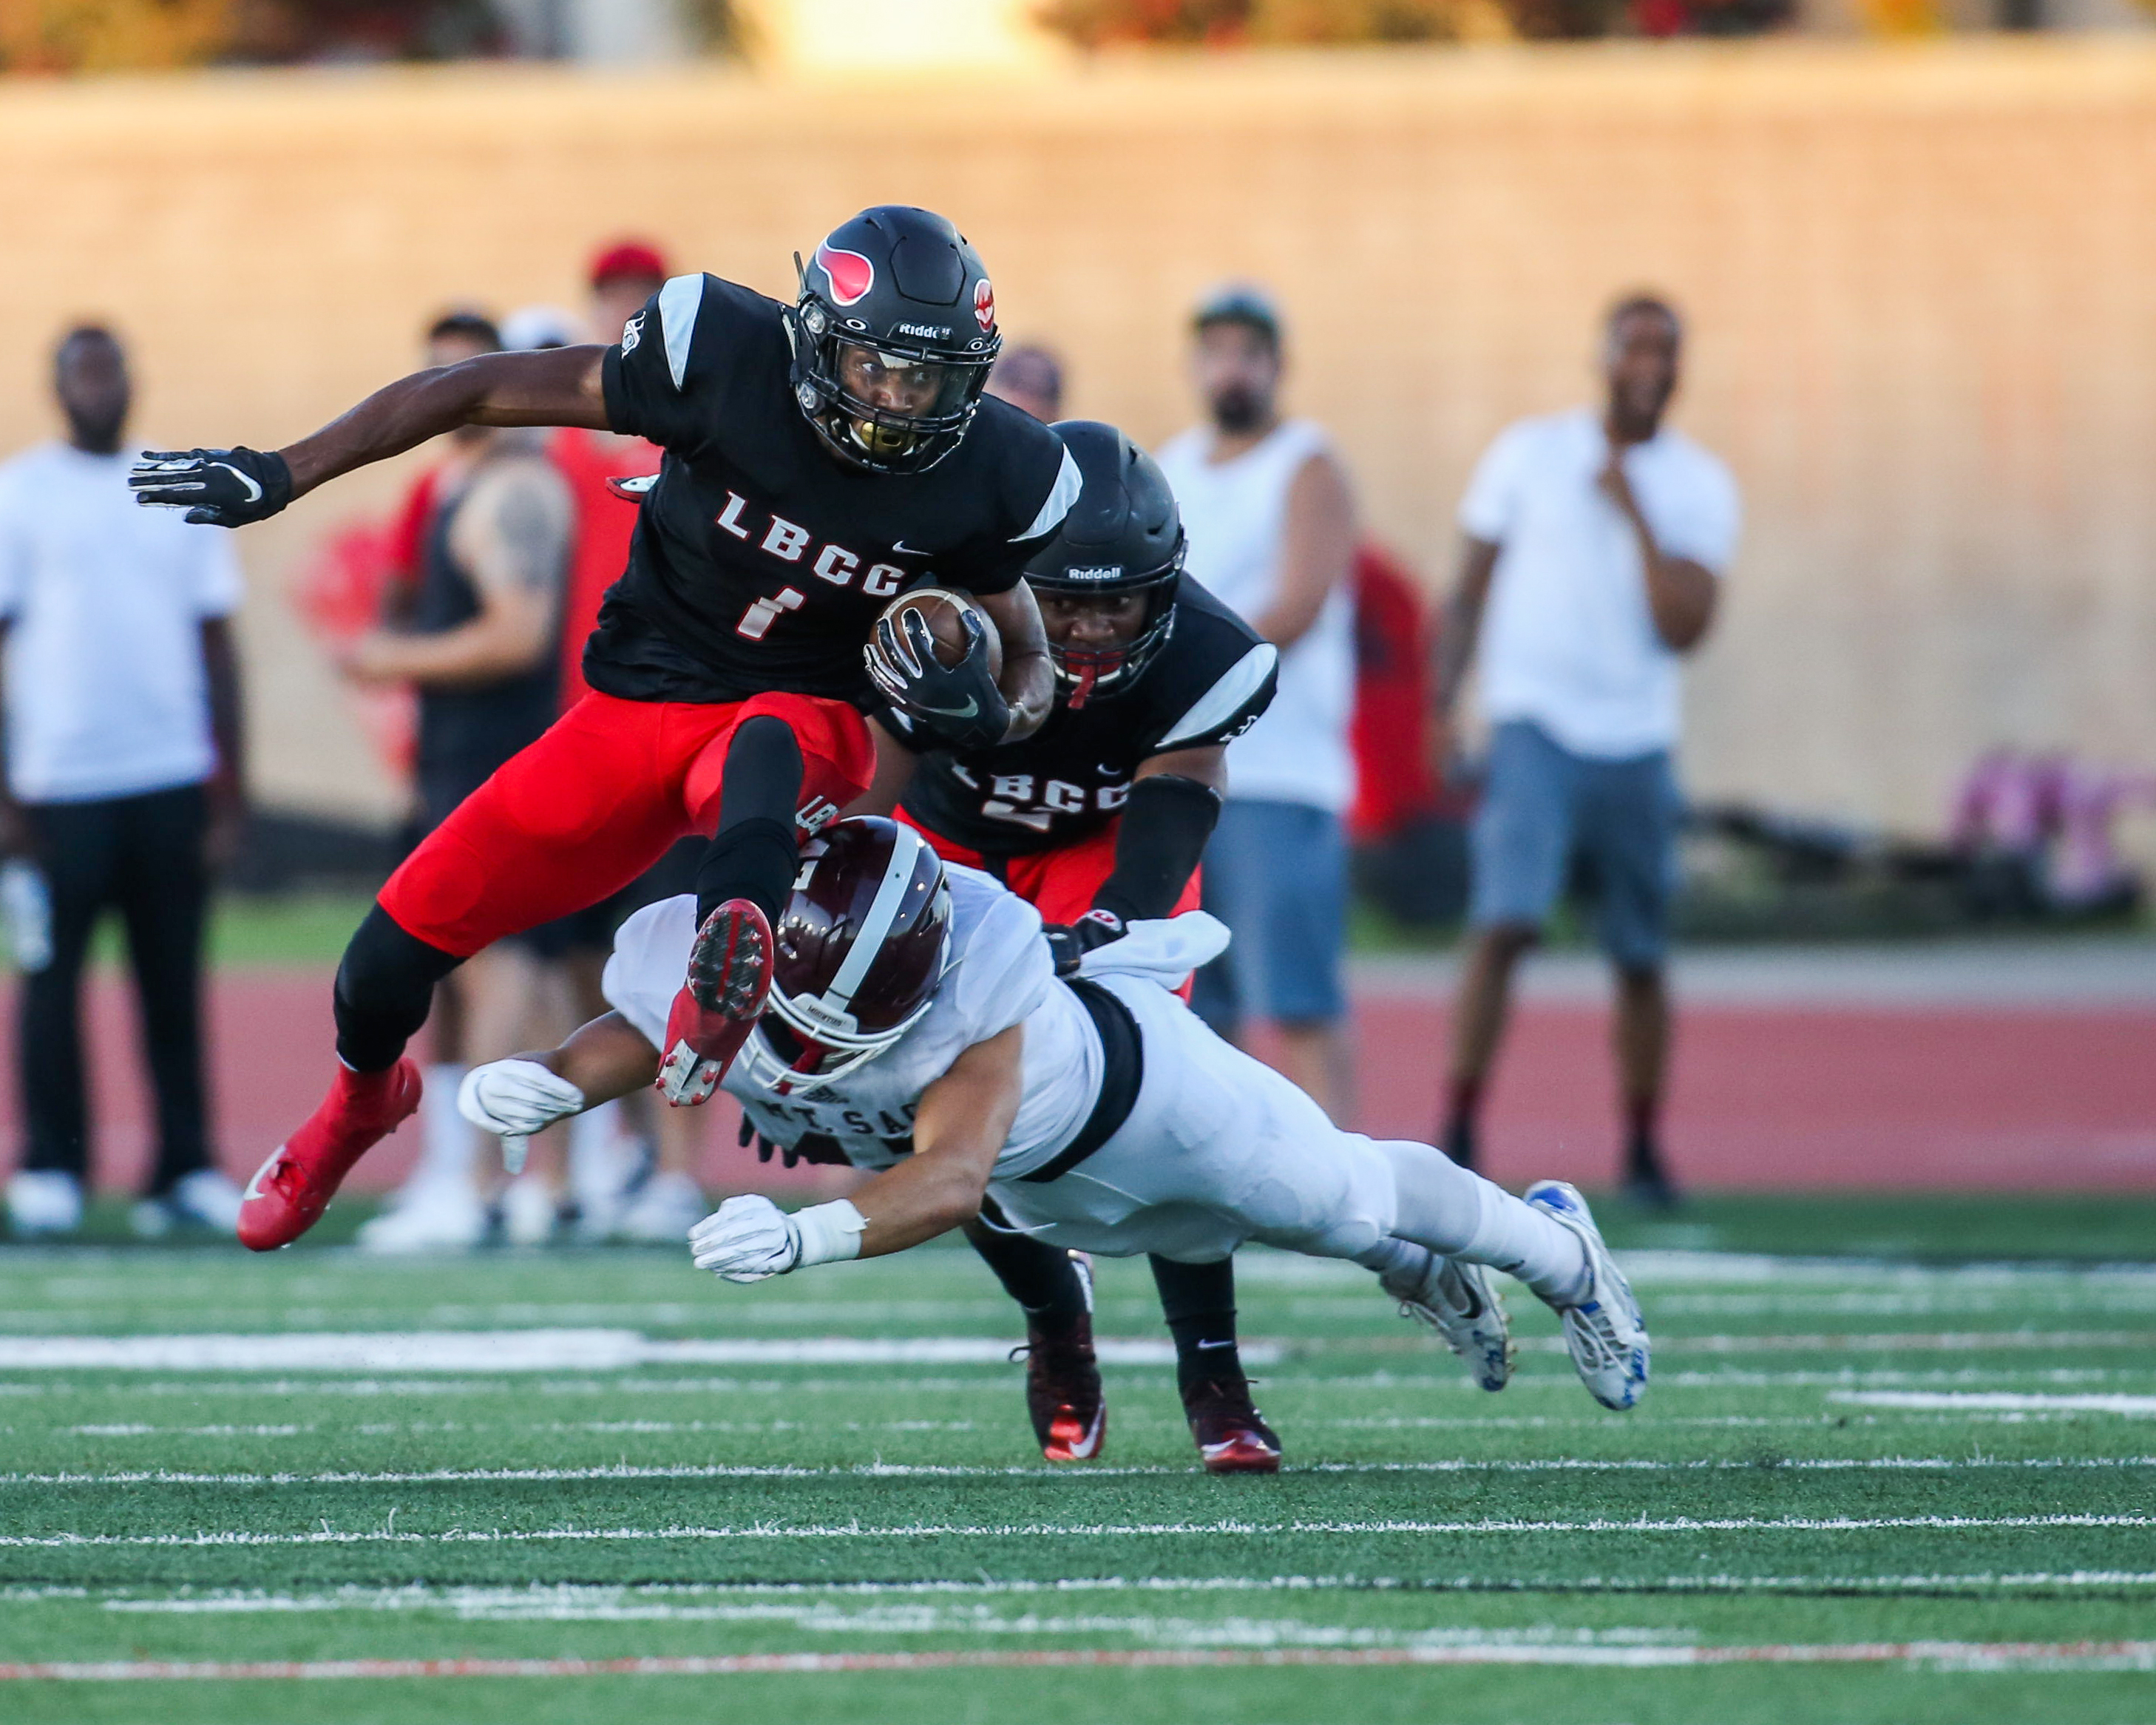 JuCo Football: LBCC Falls To Mt. SAC – The562.org